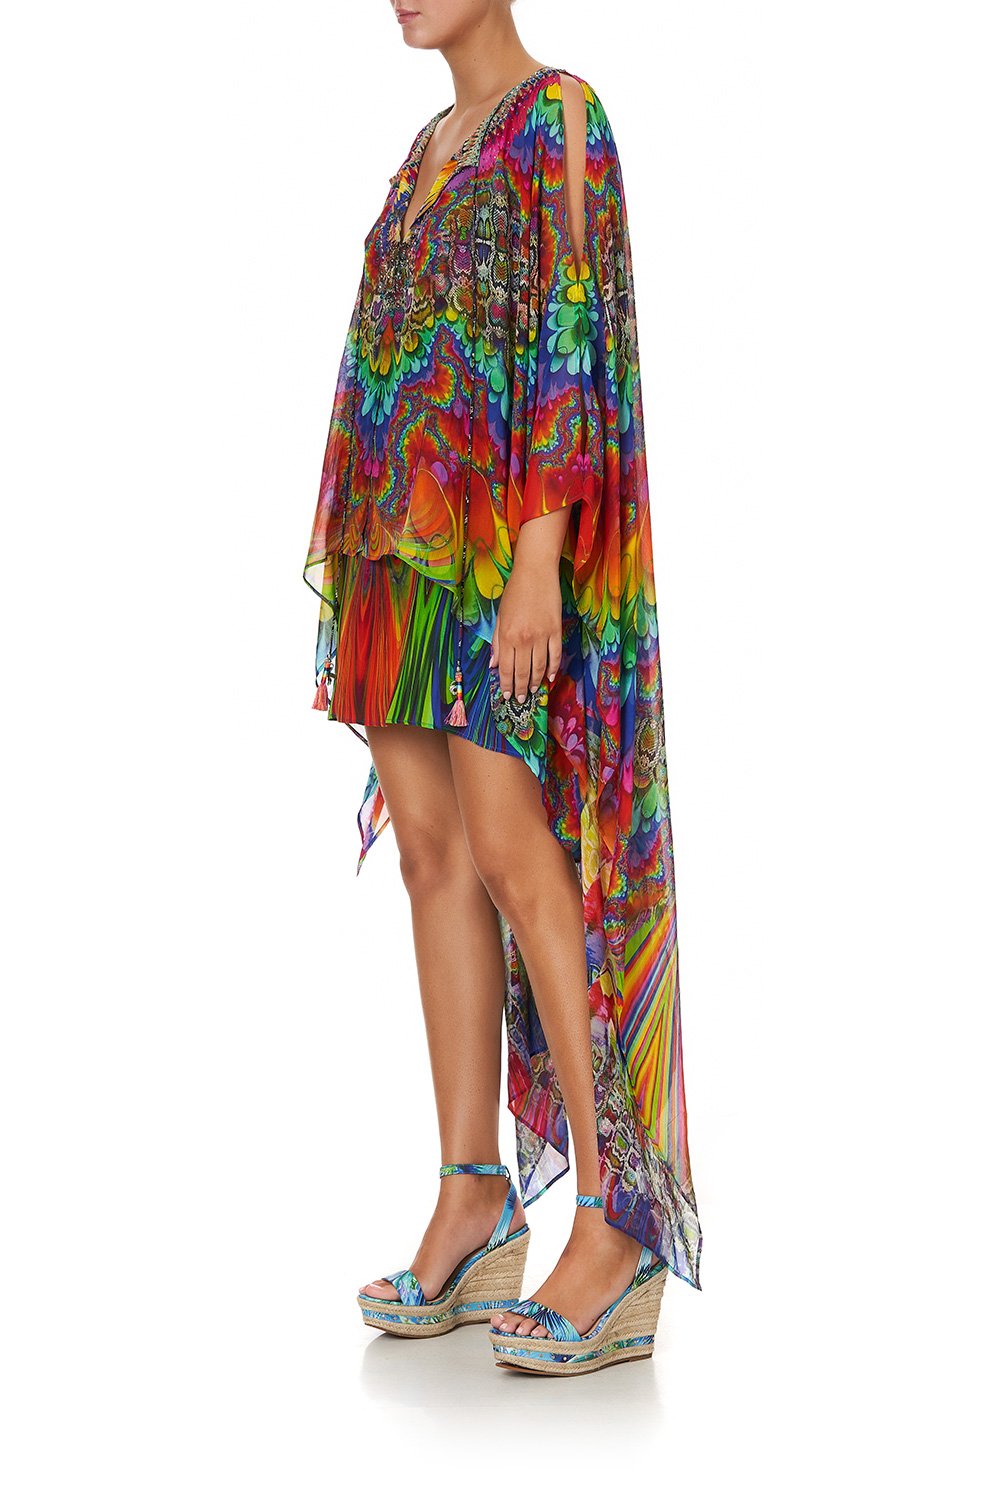 LONG SHEER OVERLAY DRESS COMING DOWN FROM COSMOS